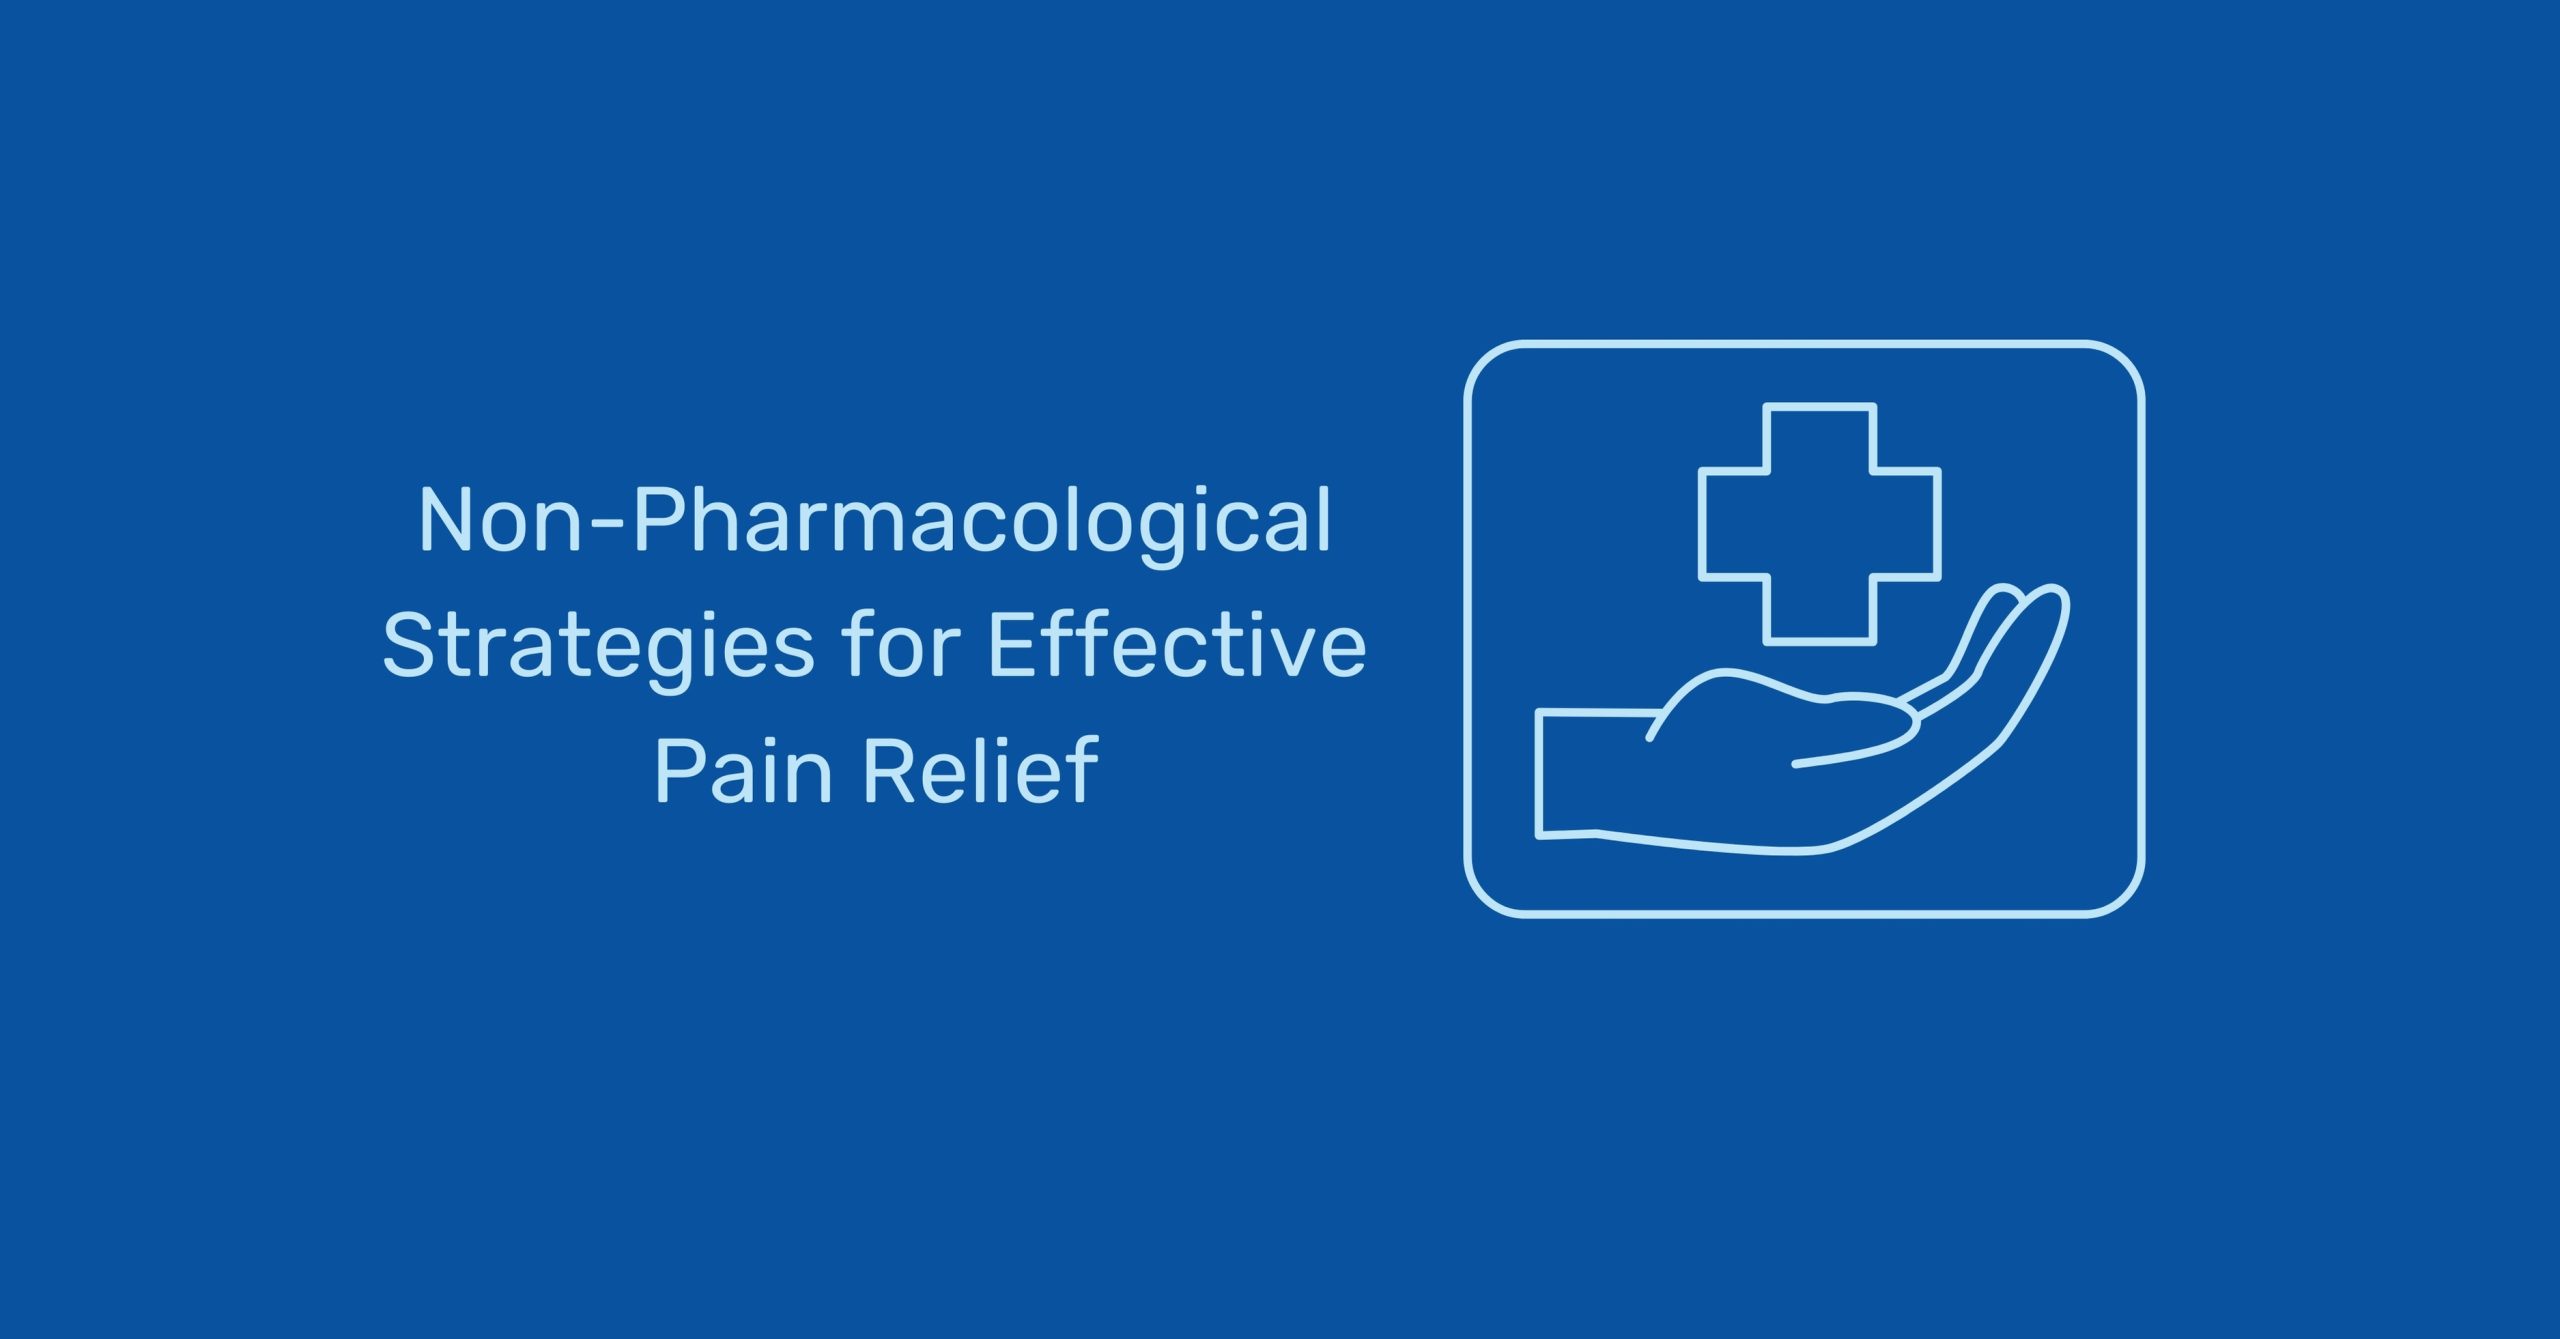 non-pharmacological pain management techniques are effective in providing pain relief